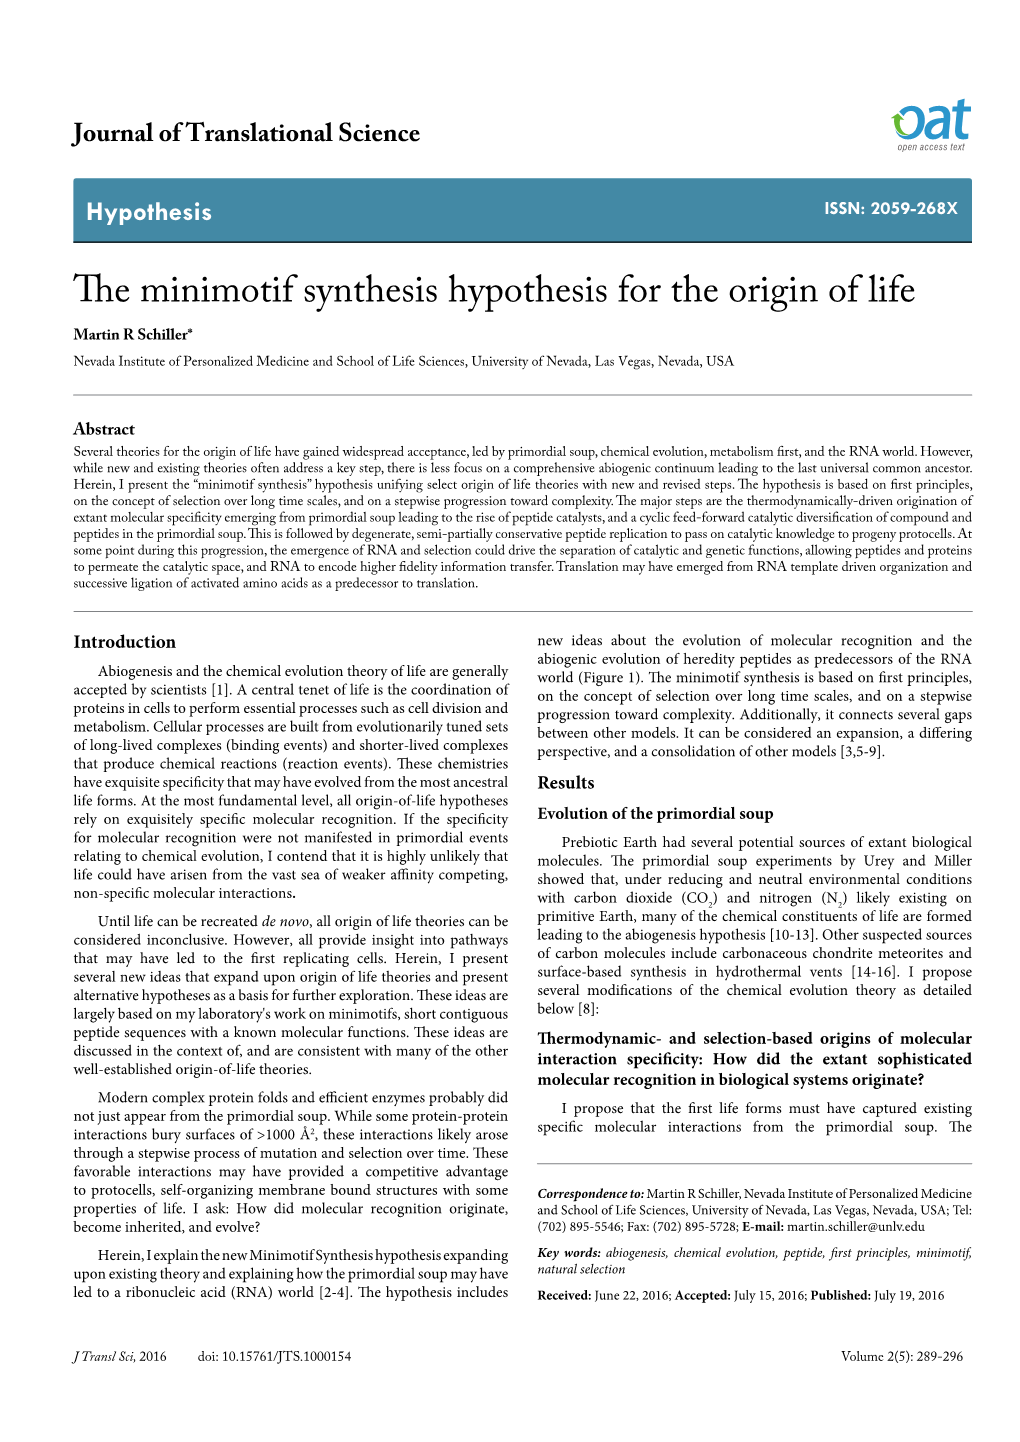 The Minimotif Synthesis Hypothesis for the Origin of Life